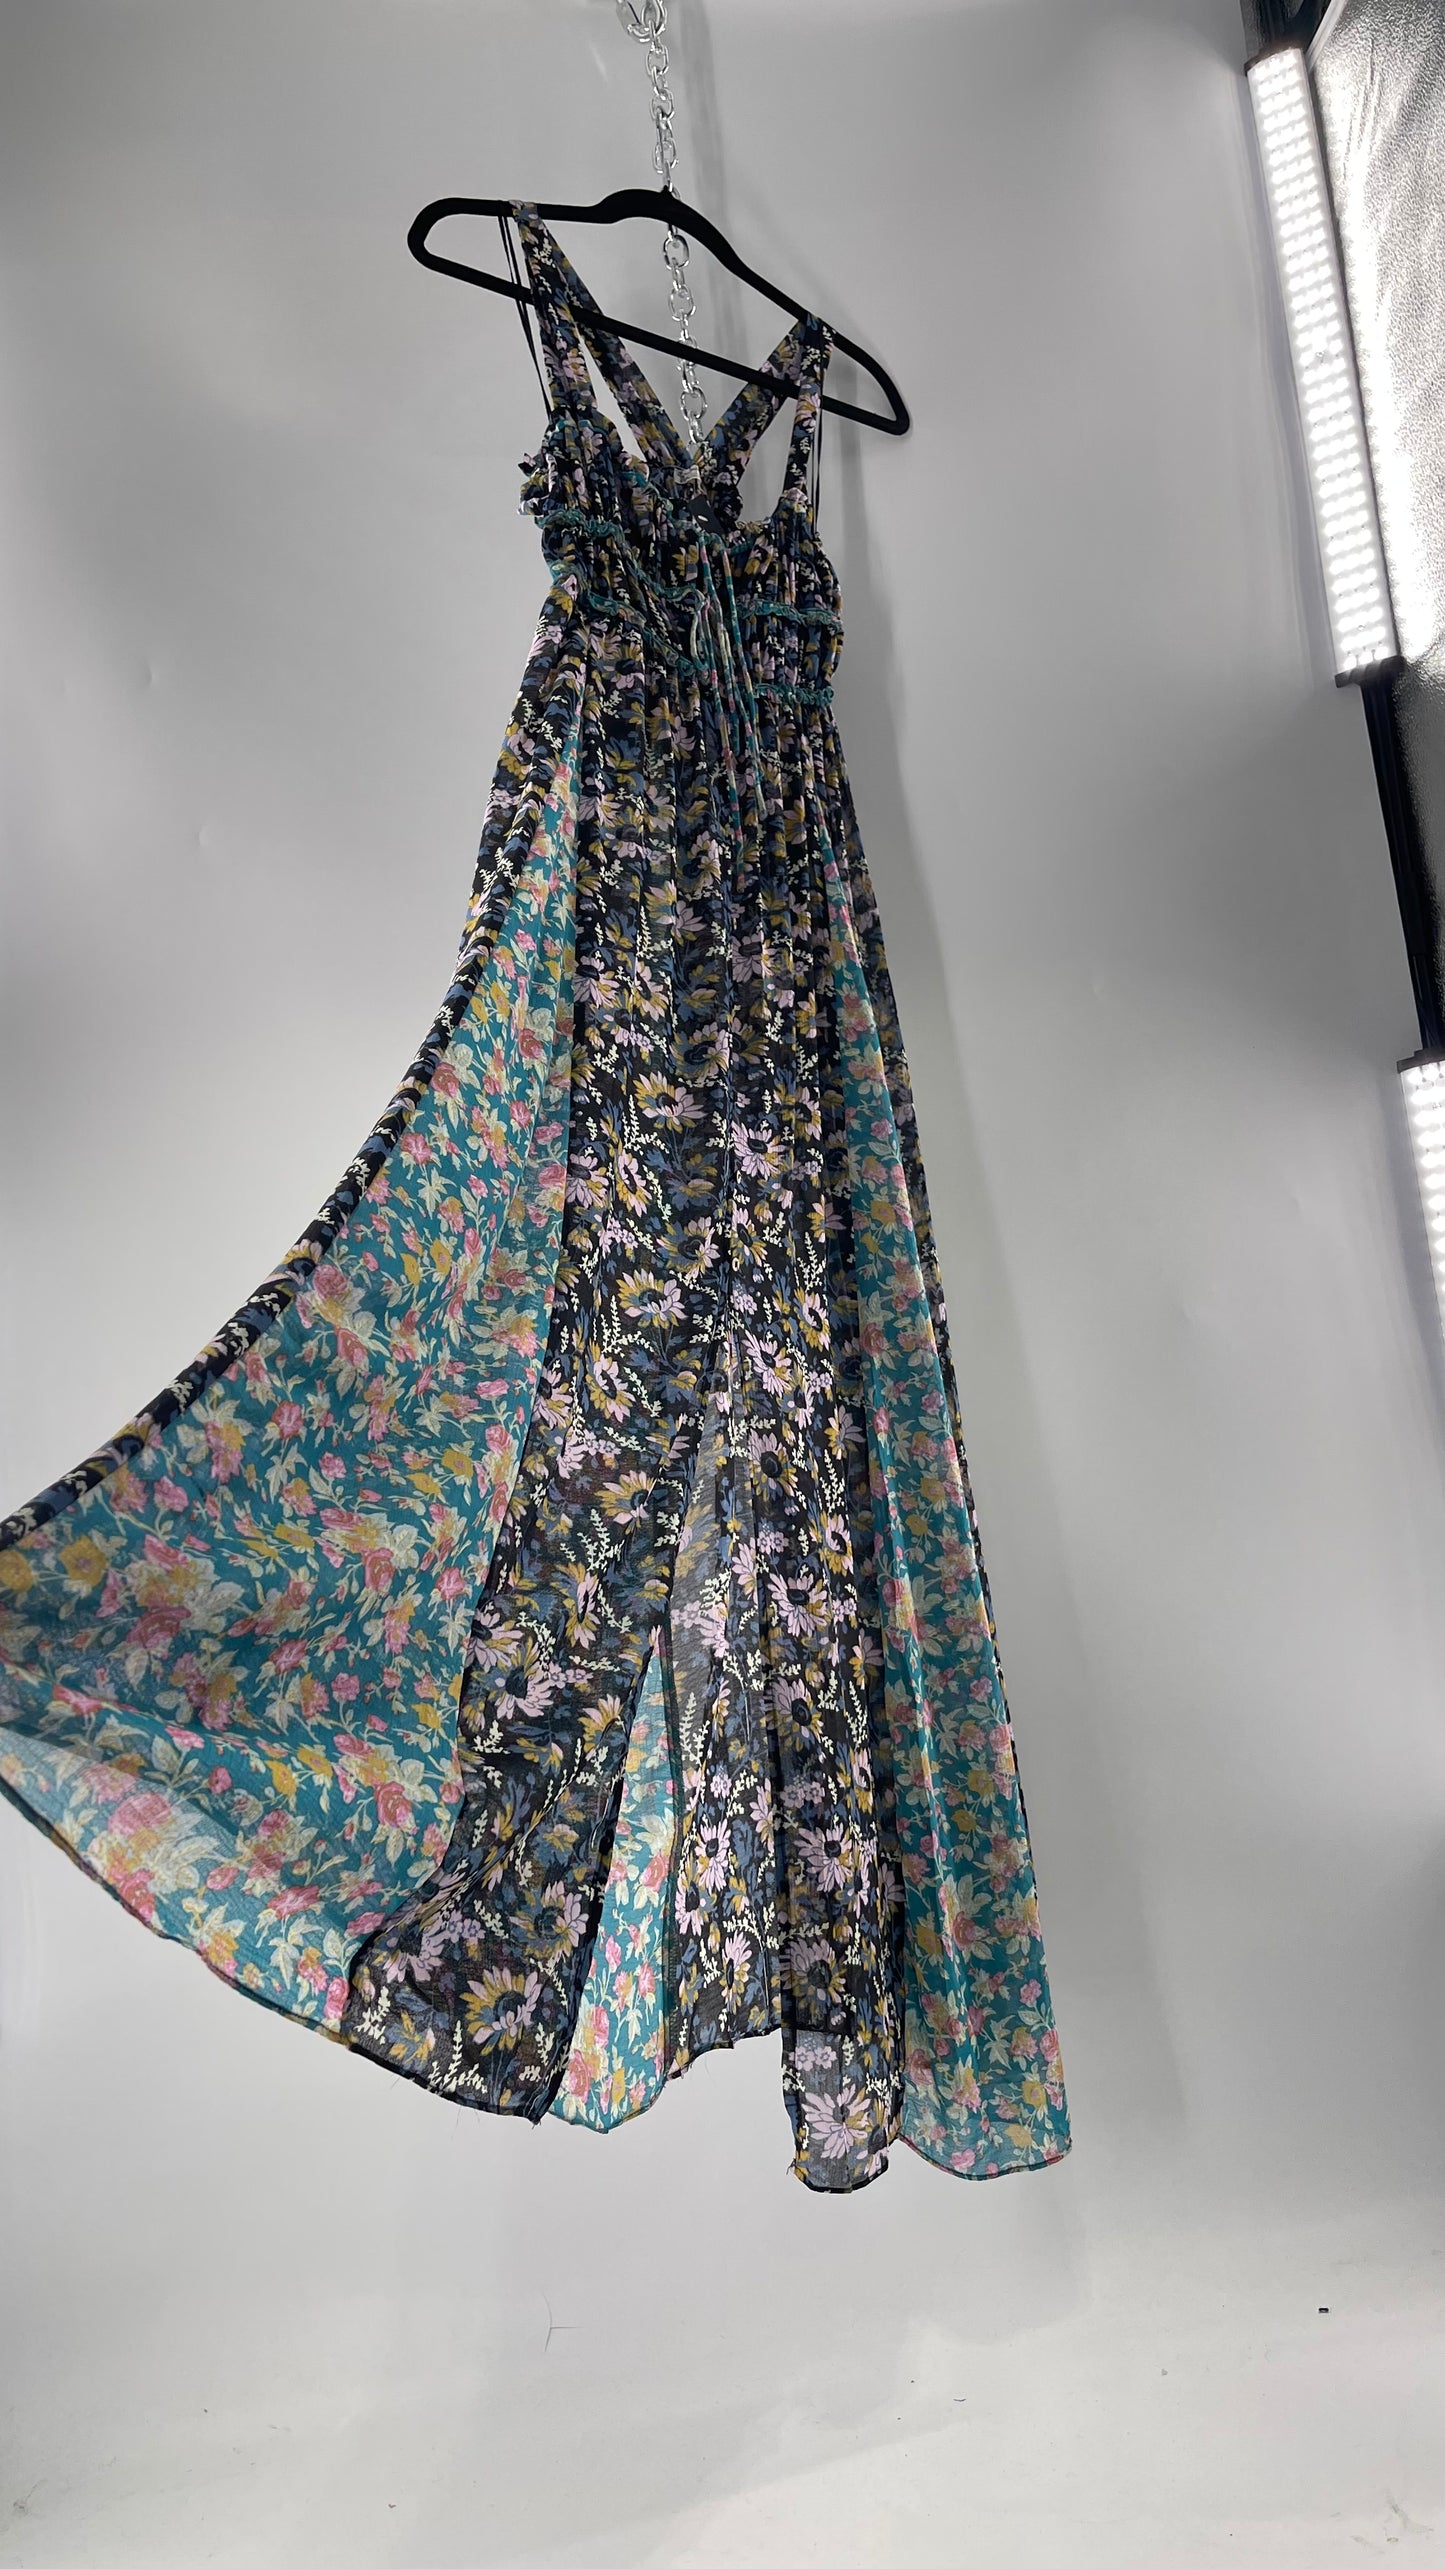 Intimately Free People Black and Teal Mixed Pattern Floral Maxi Dress with Tags Attached (XS)